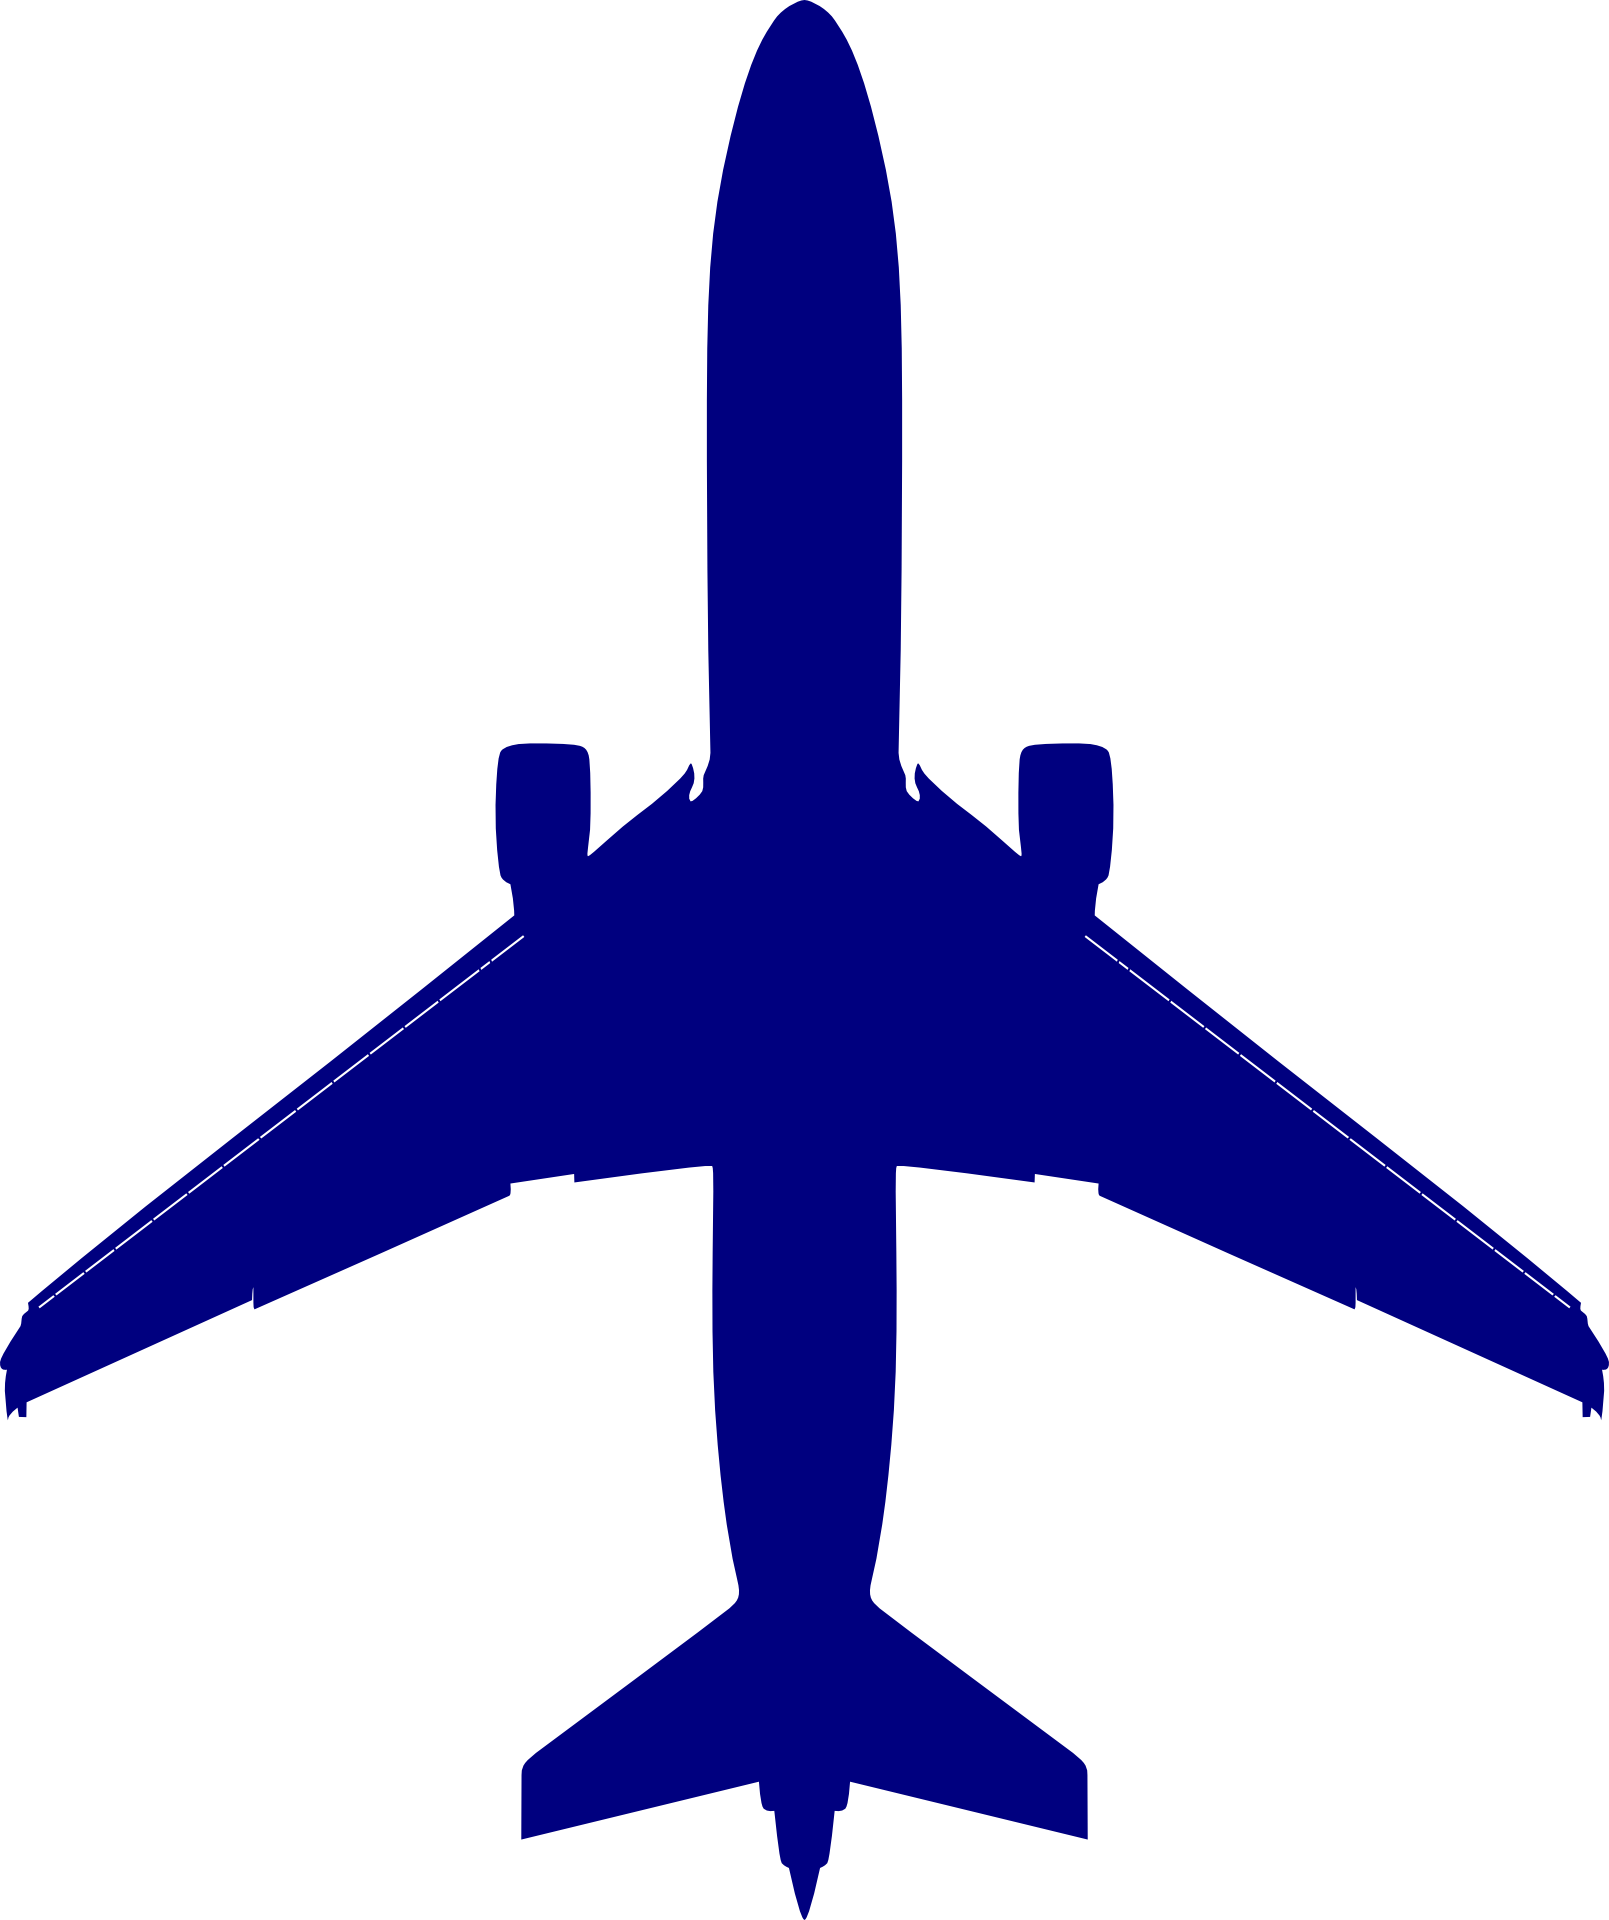 Blue airplane clipart free image